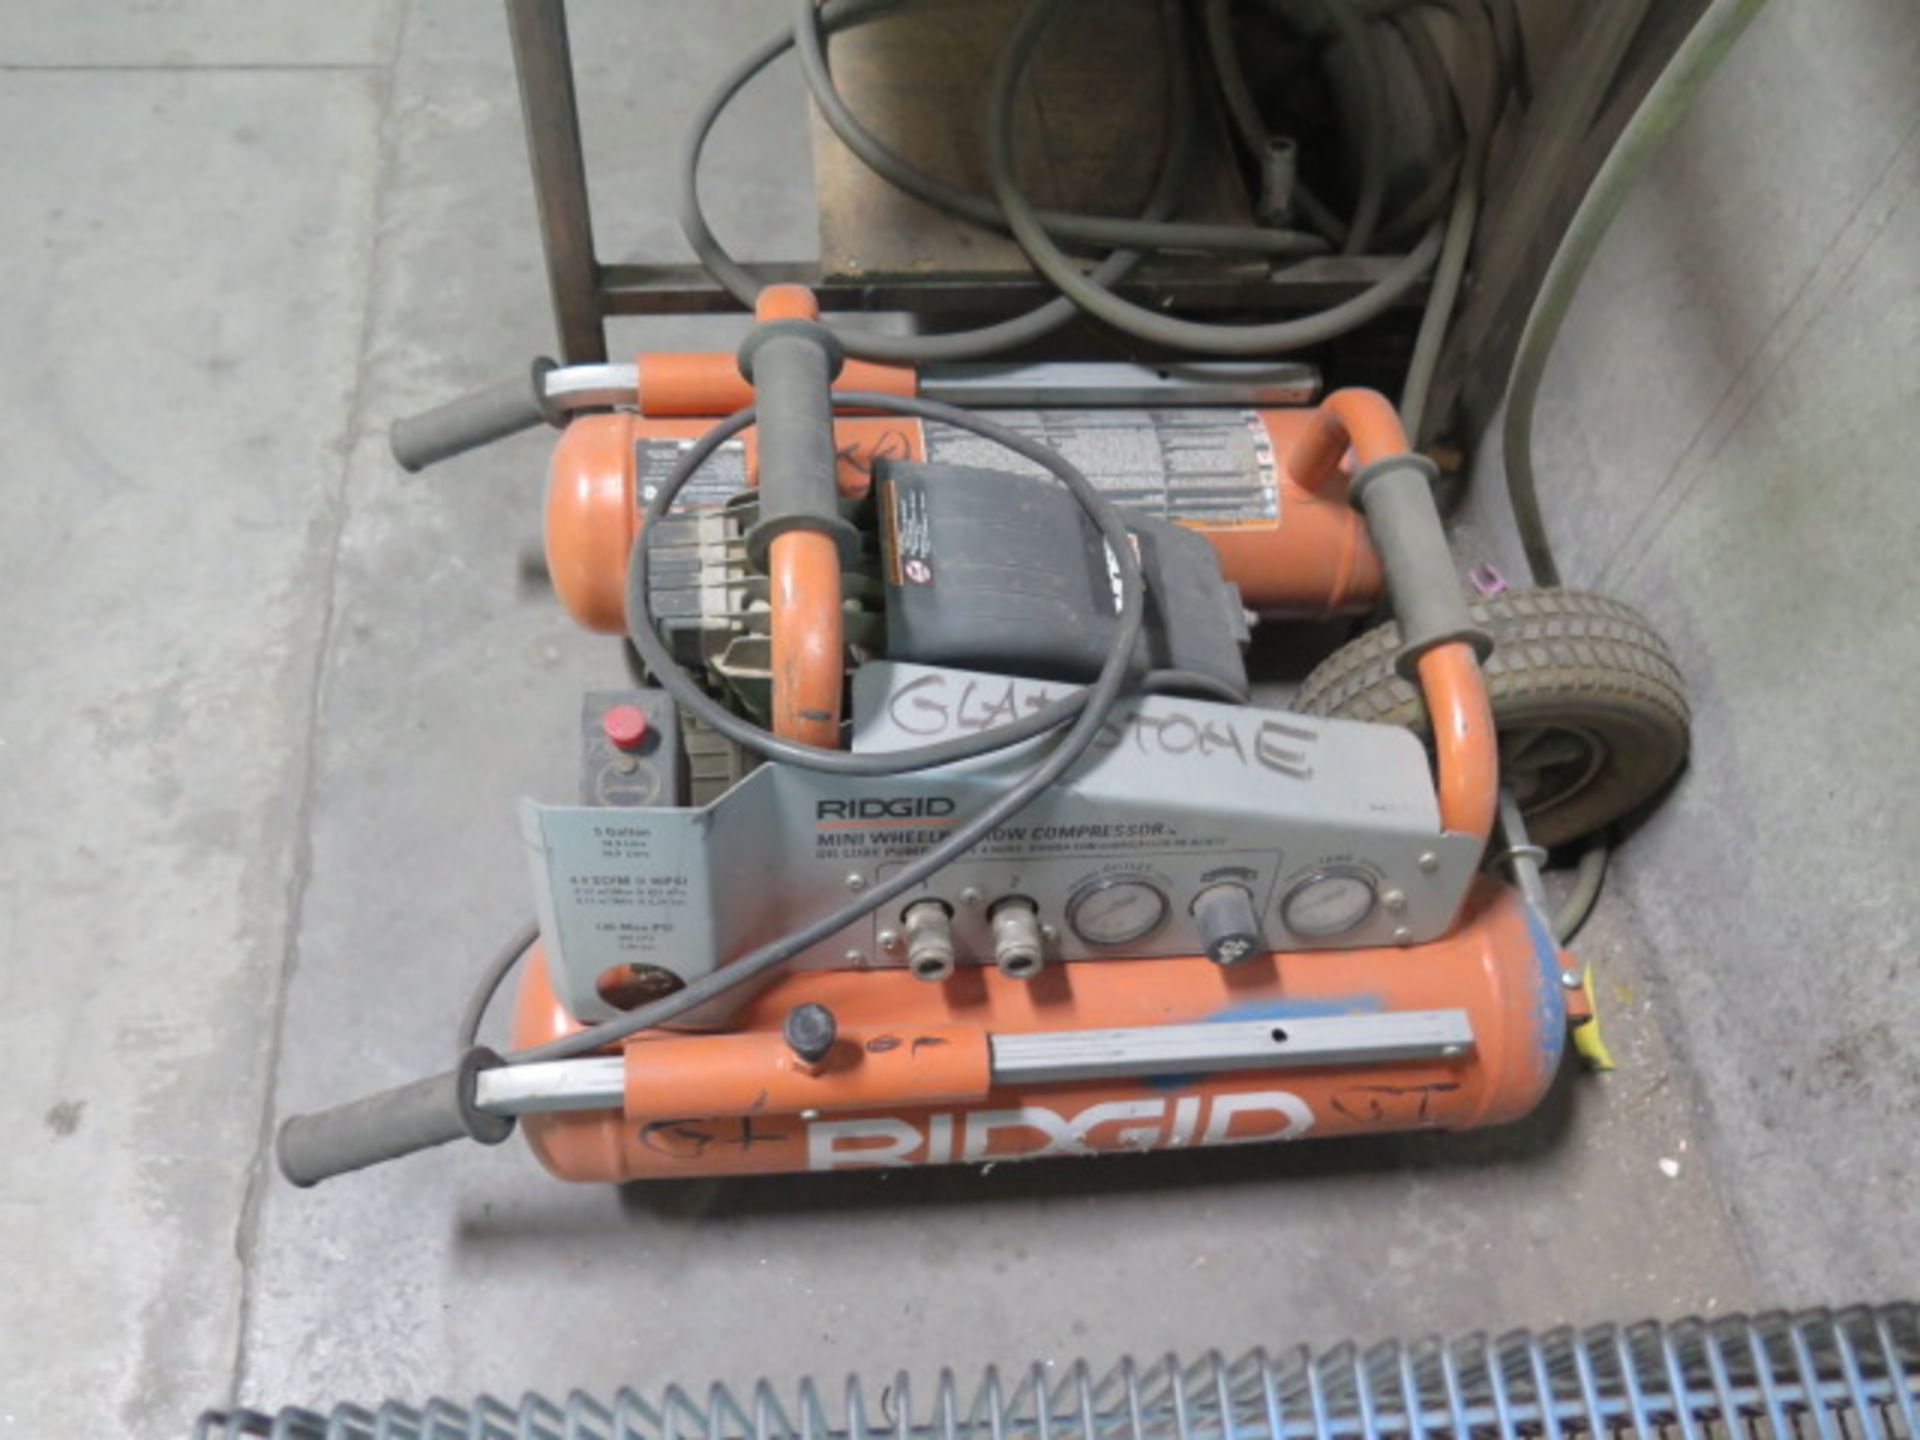 Speedaire and Ridgid Portable Air Compressors (SOLD AS-IS - NO WARRANTY) - Image 3 of 8